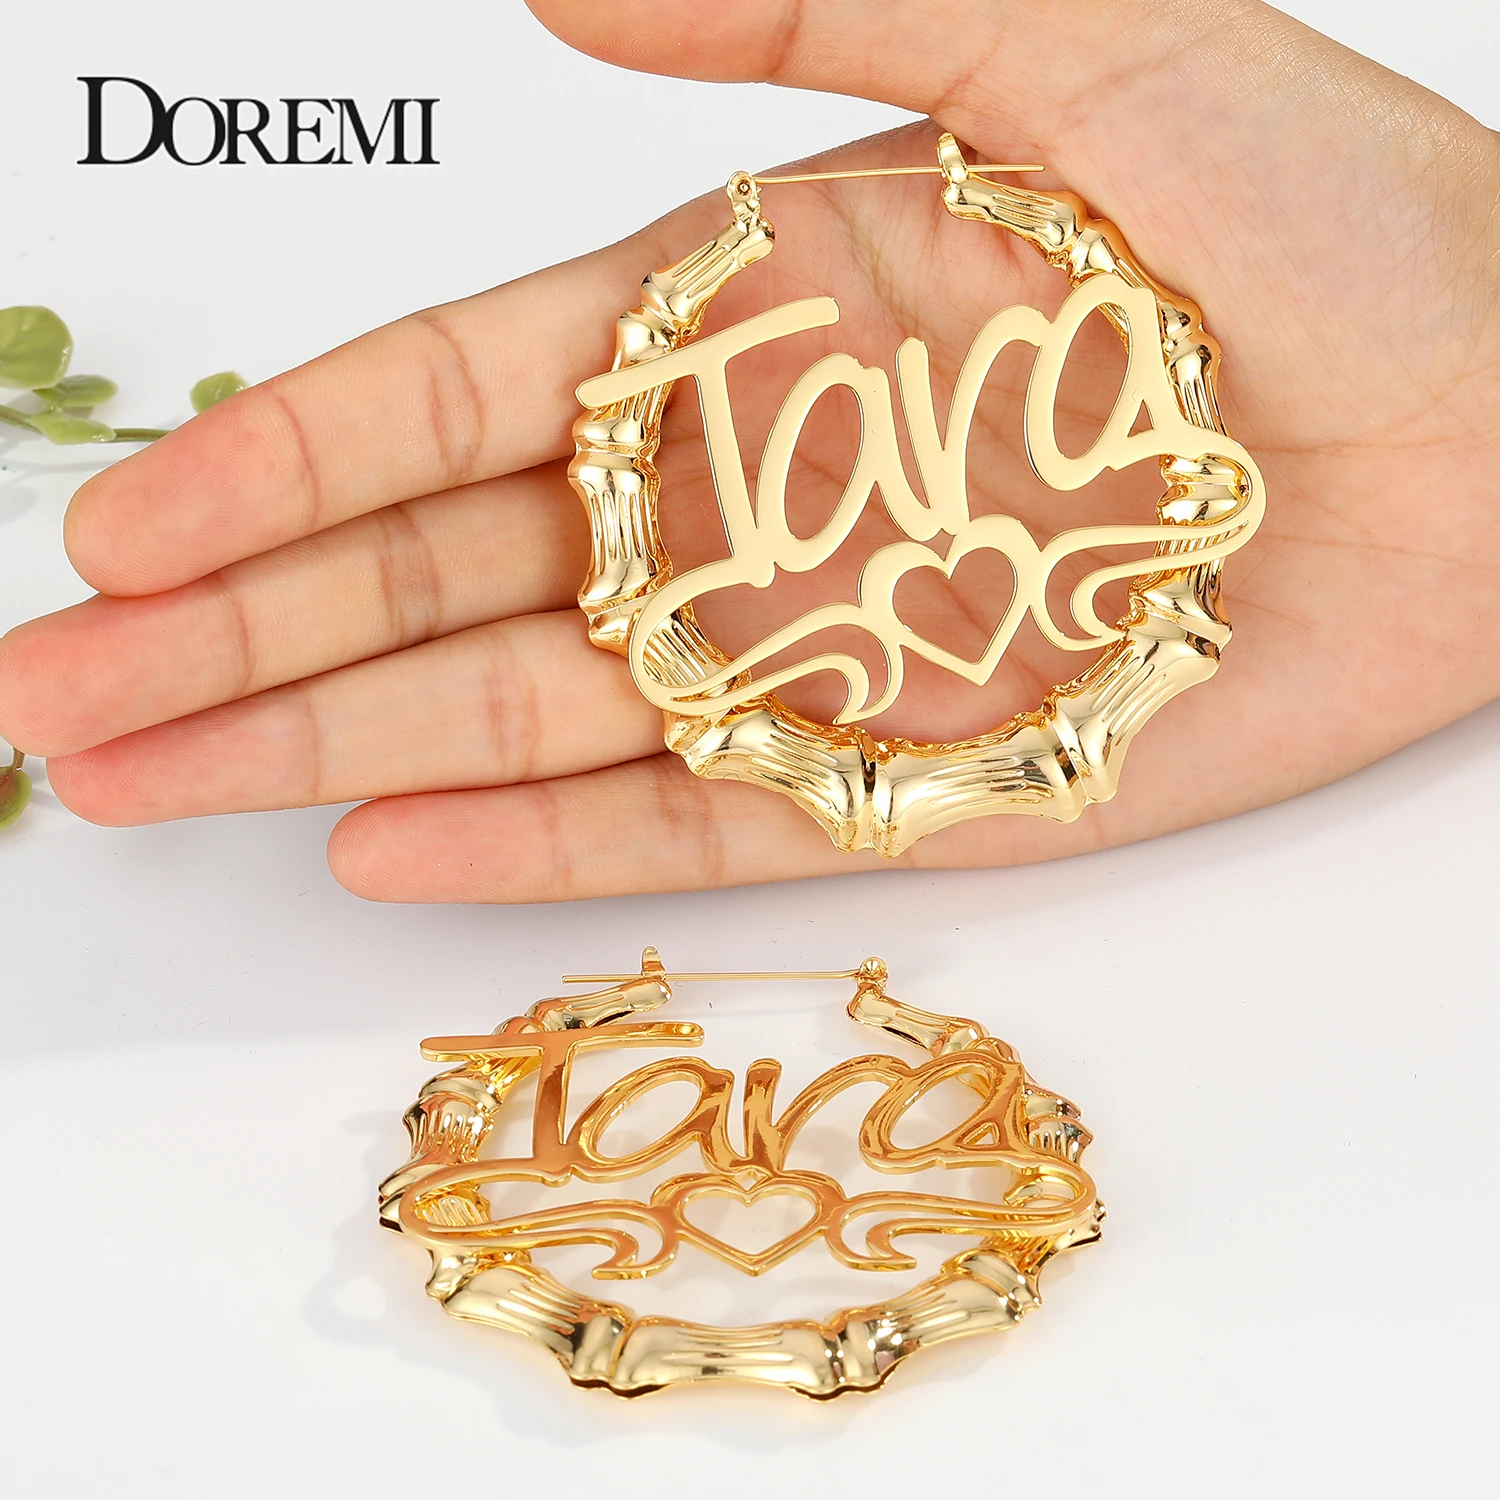 DOREMI 30-90MM Stainless Custom Bamboo Earrings Hoop Personalized Name Earrings Personalized Jewelry Charming Earrings Gold Gift